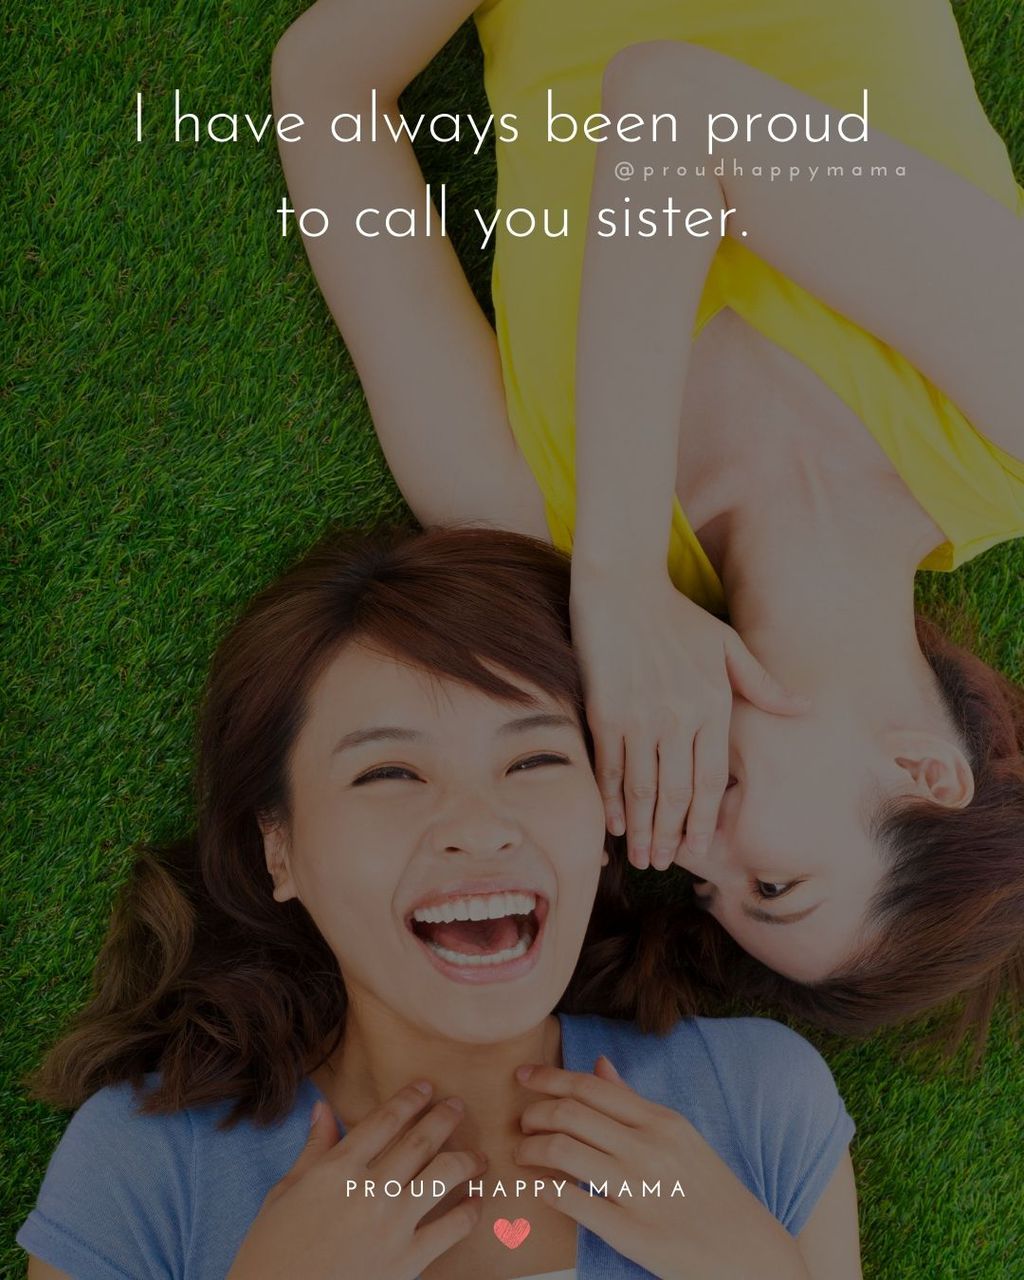 Sister Quotes - I have always been proud to call you sister